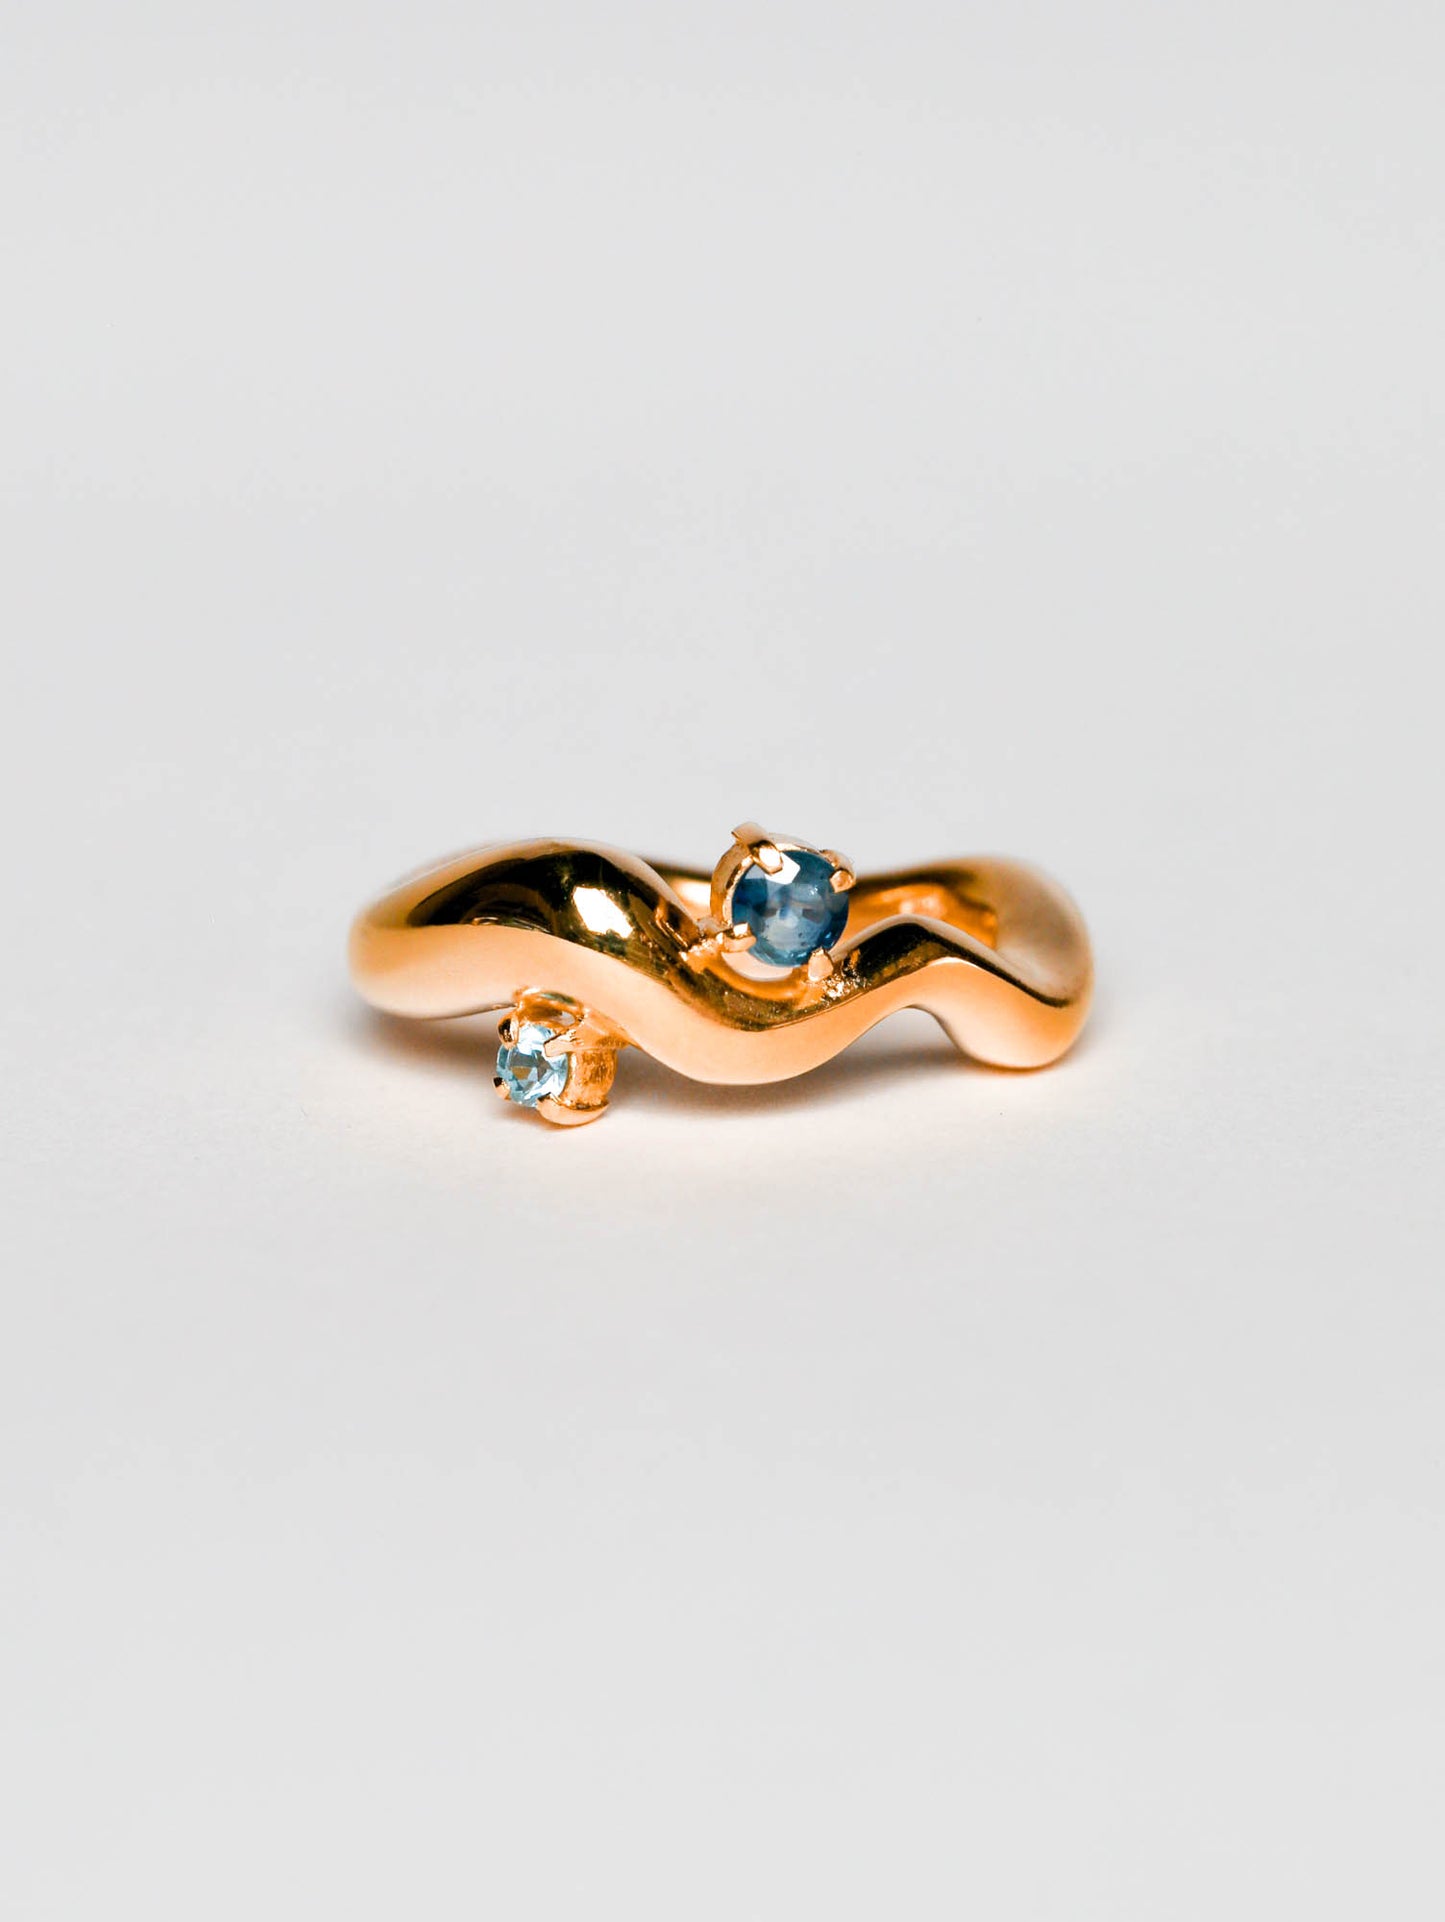 Wave Ring Gold with 2 Sapphire Stones # 1 | Size 7.5